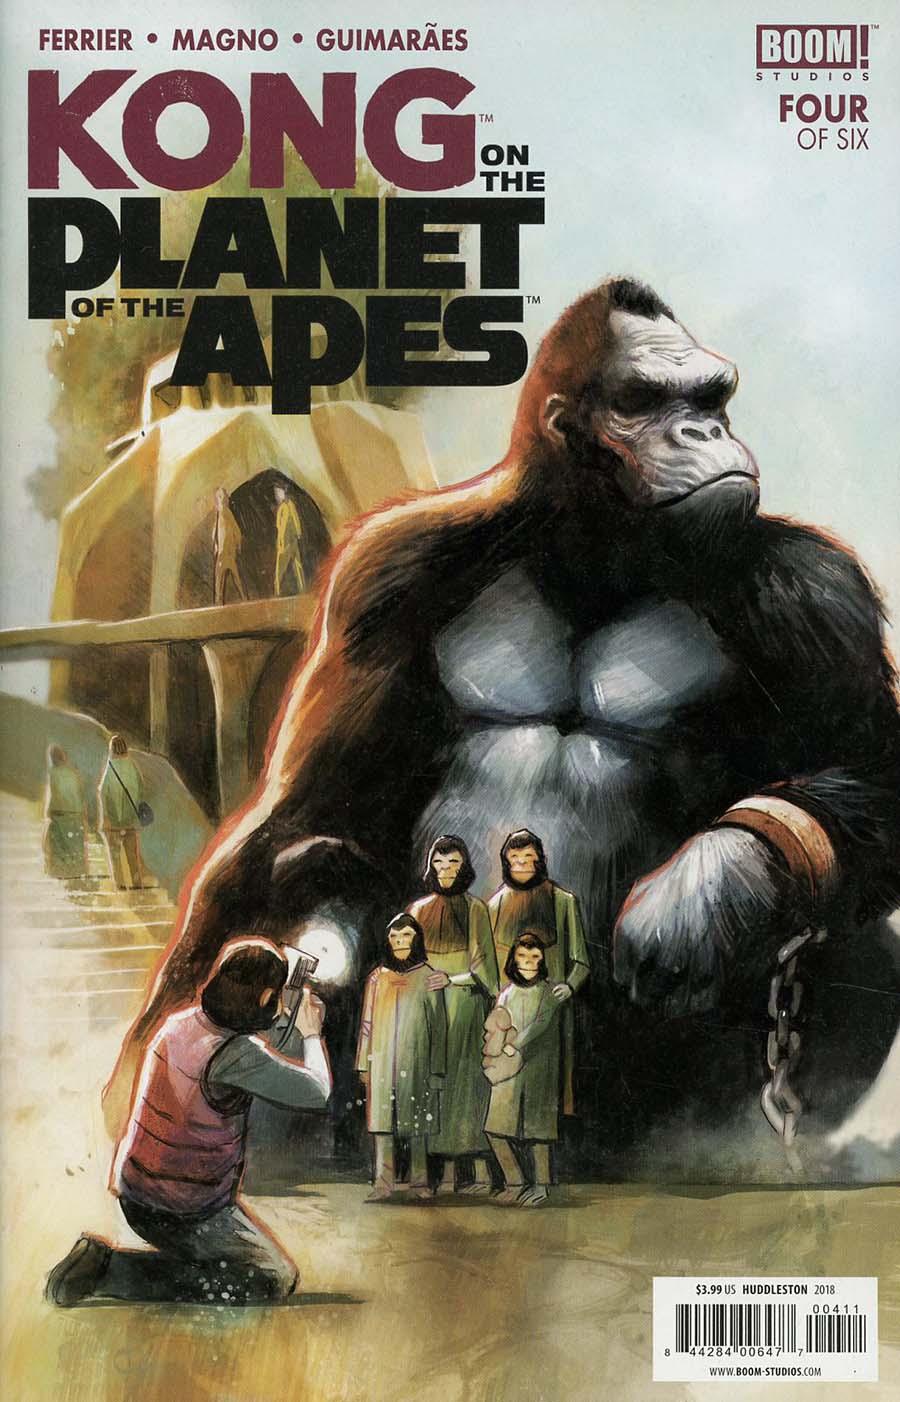 Kong On The Planet Of The Apes Vol. 1 #4